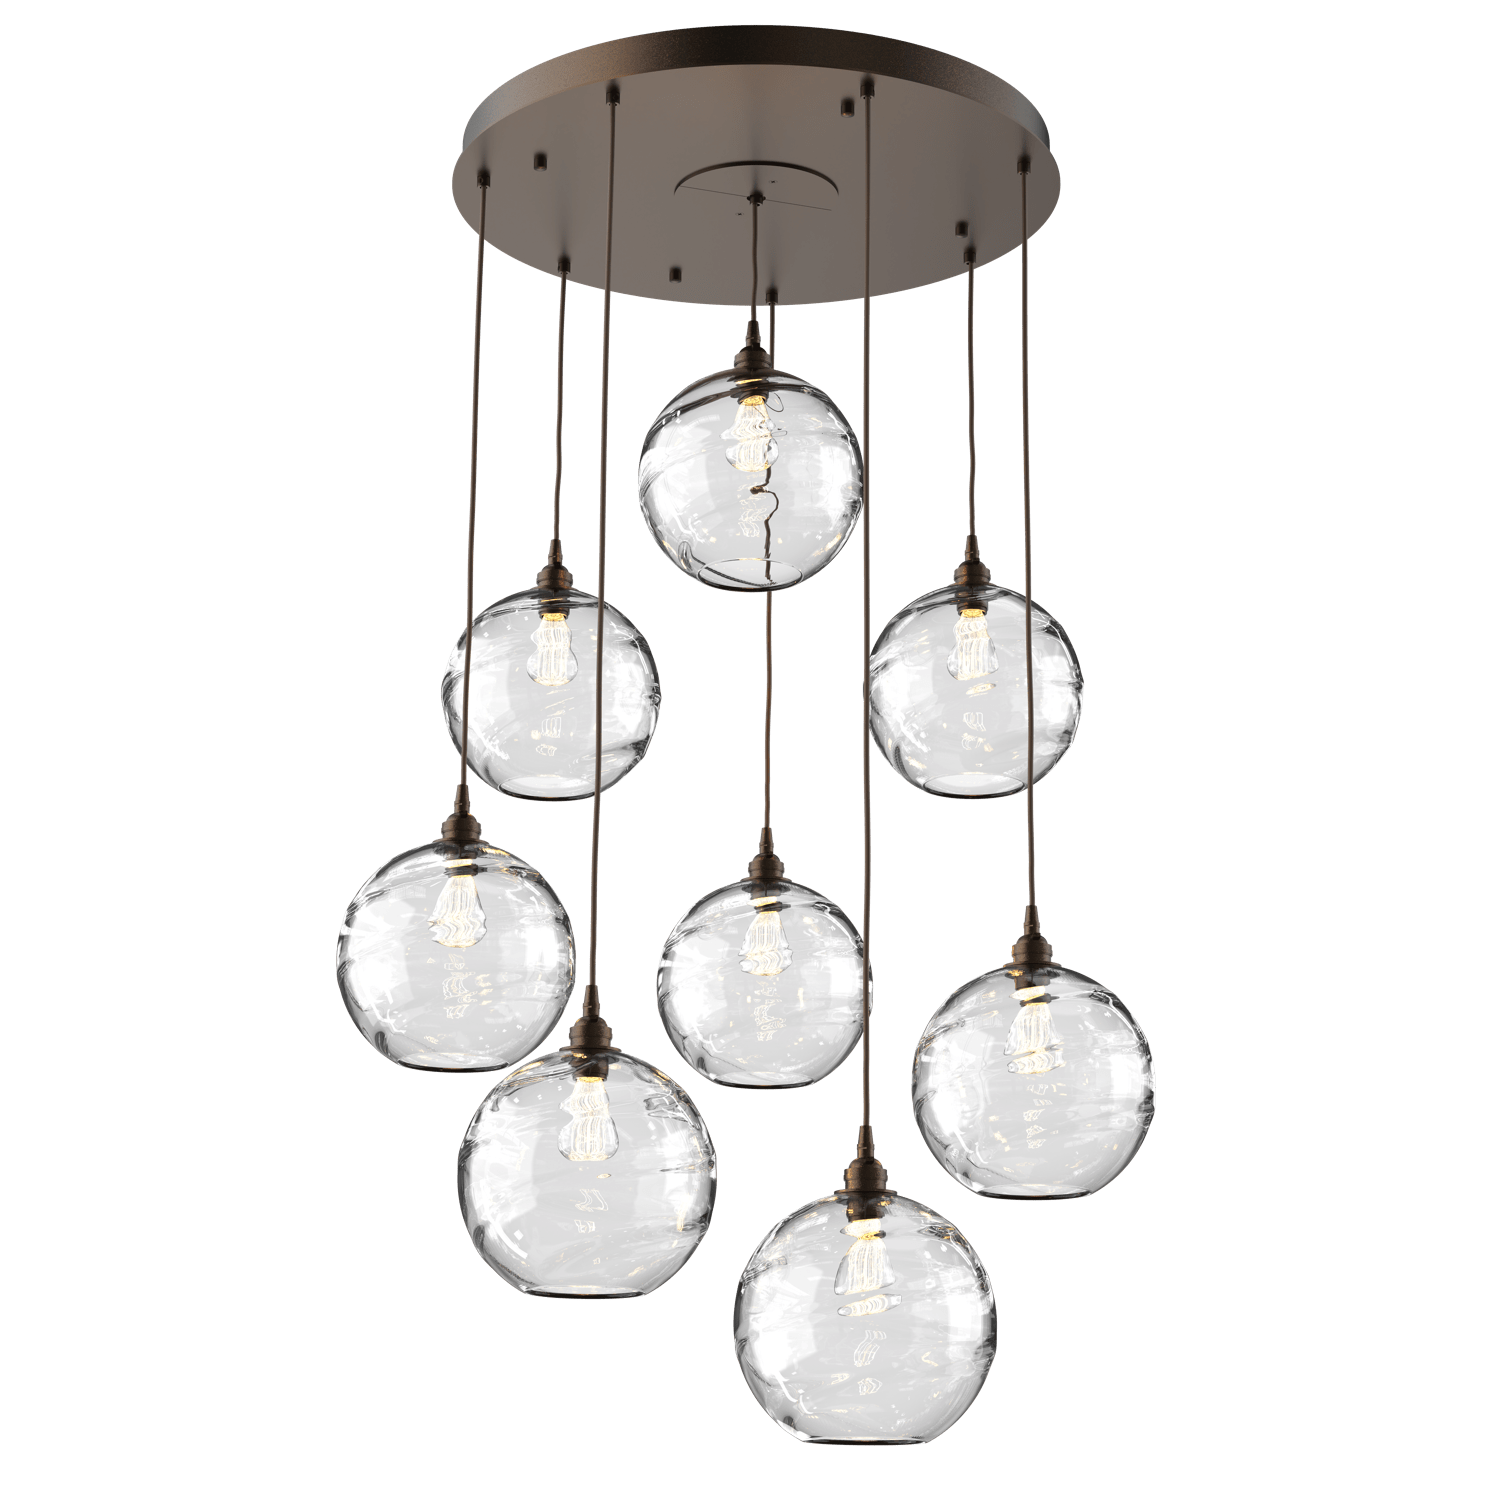 CHB0047-08-FB-OC-Hammerton-Studio-Optic-Blown-Glass-Terra-8-light-round-pendant-chandelier-with-flat-bronze-finish-and-optic-clear-blown-glass-shades-and-incandescent-lamping